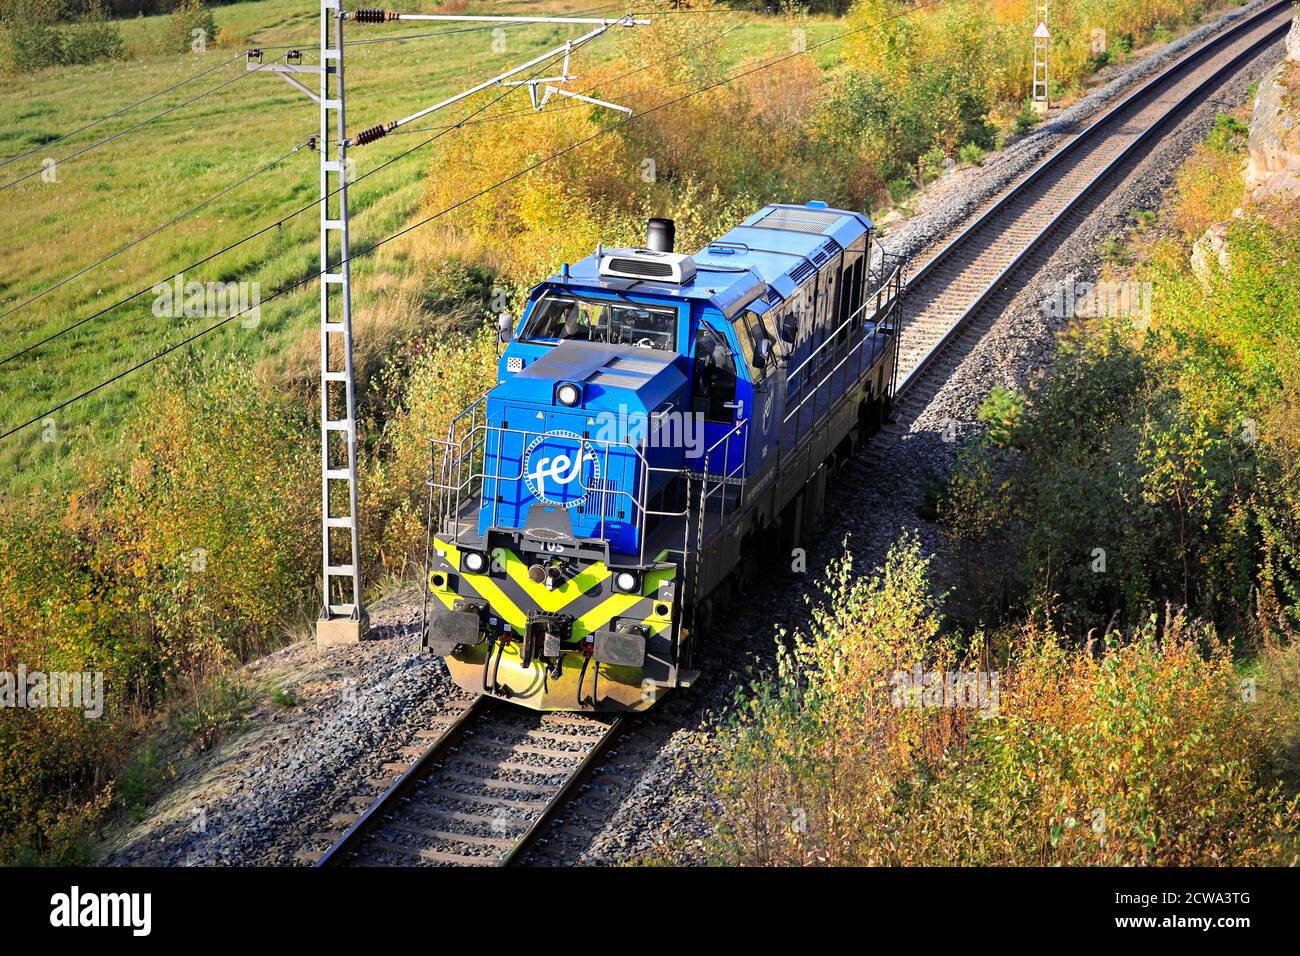 Fenniarail Class Dr18 No. 105, CZ Loco built diesel-electric locomotive of Fenniarail Oy at speed after departing Salo, Finland. September 27, 2020. Stock Photo